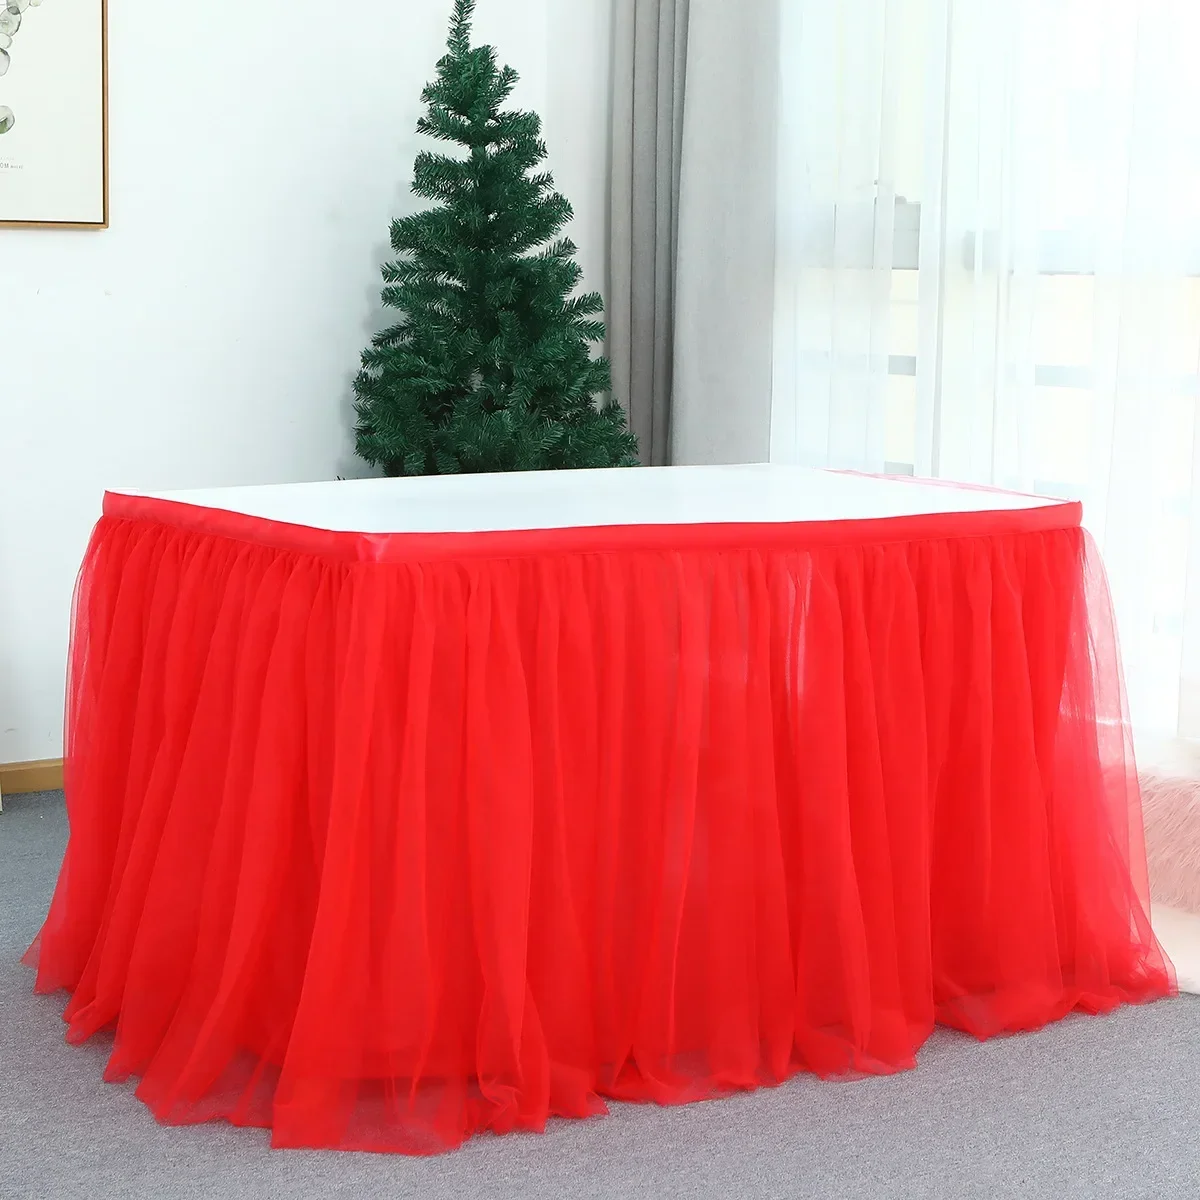 

Tulle Table Skirt Kids Festive Party Supplies Tablecloth for Birthday Halloween Banquet Wedding Table Cloth Fablic Decoration